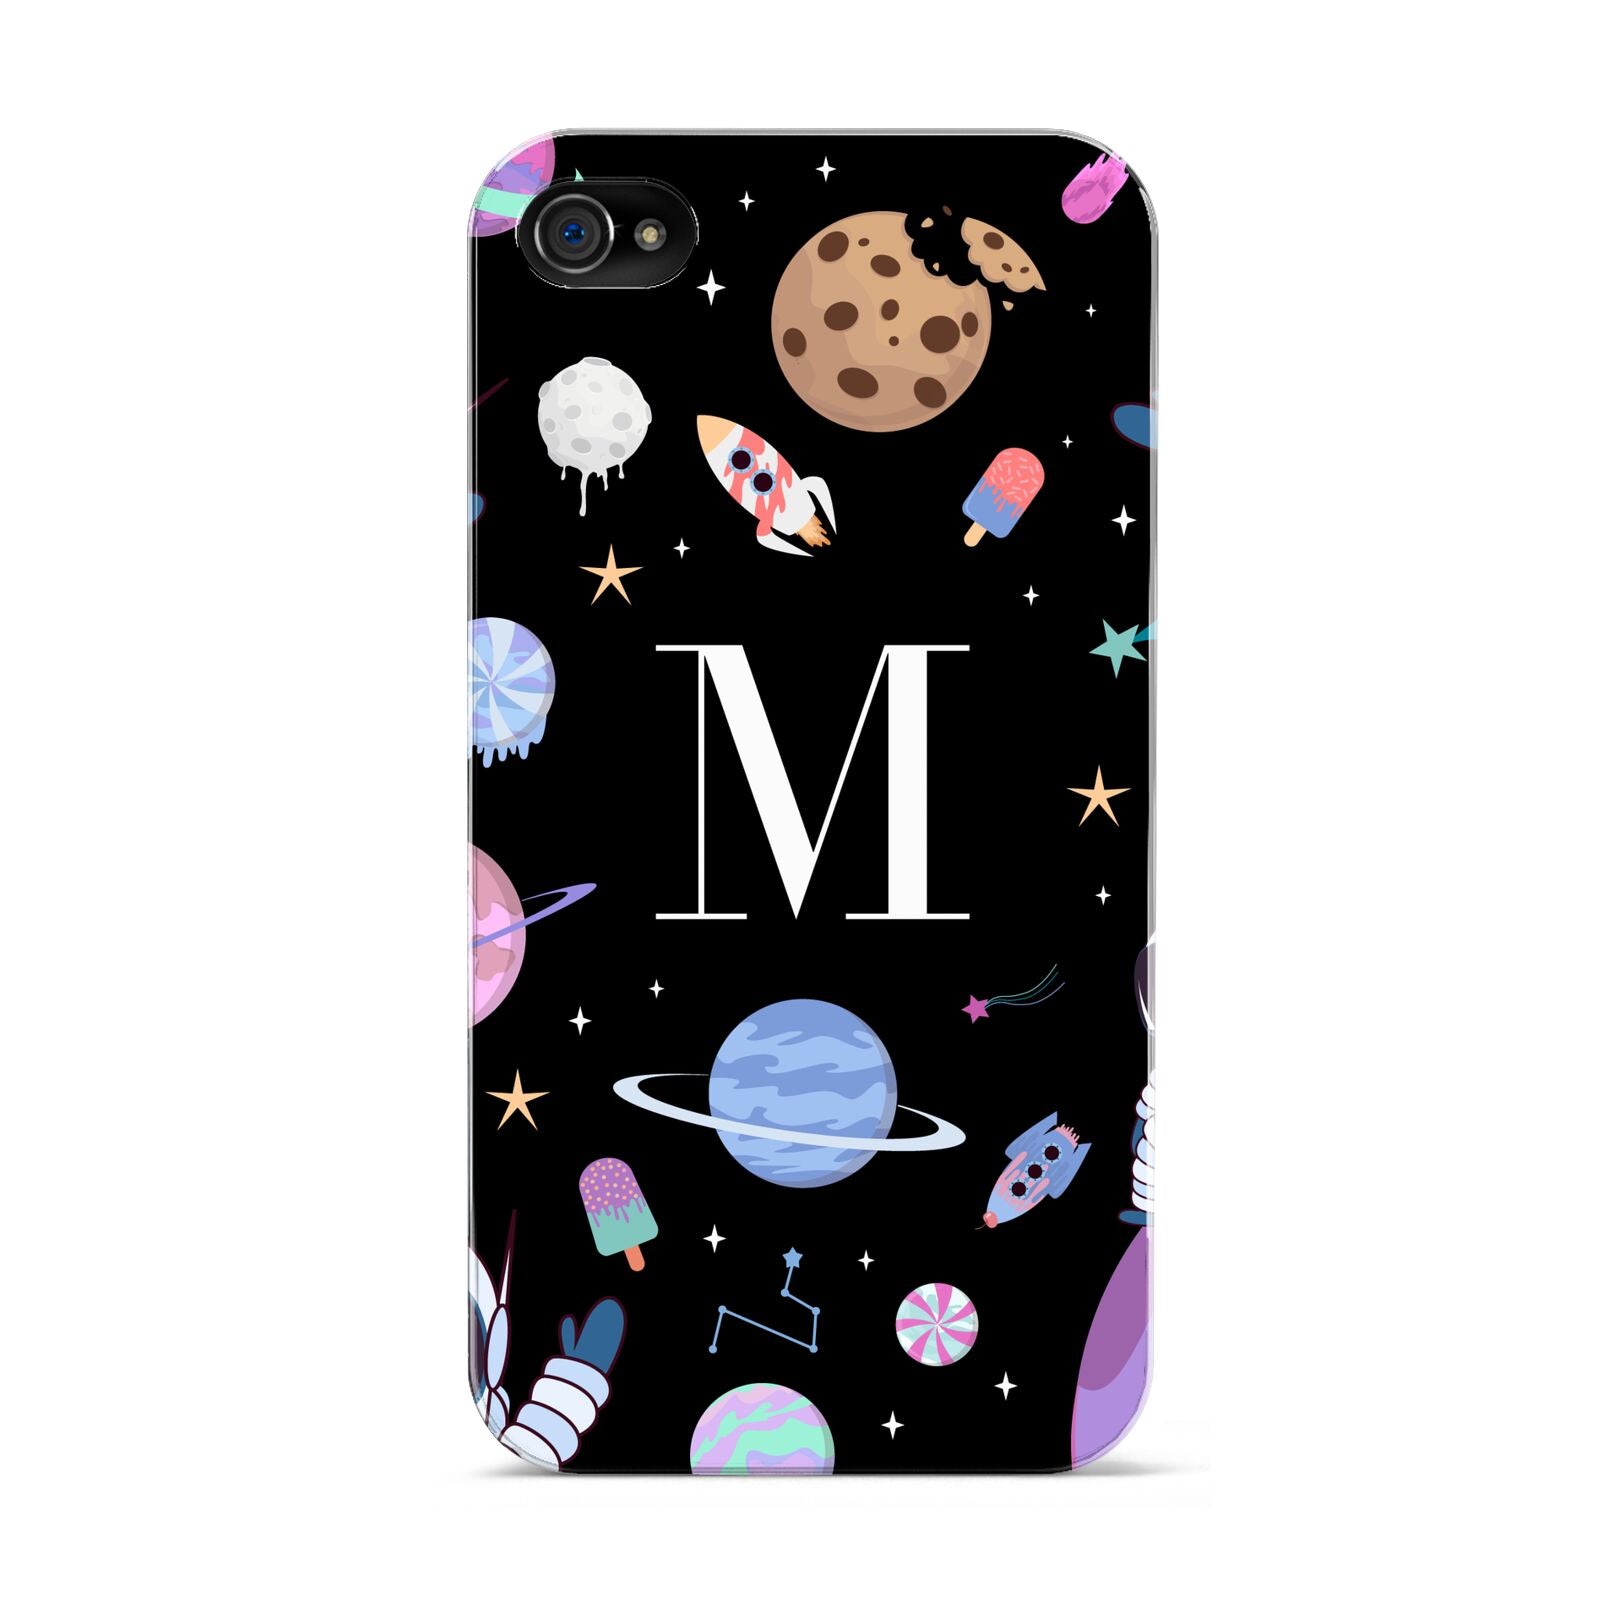 Initialled Candy Space Scene Apple iPhone 4s Case